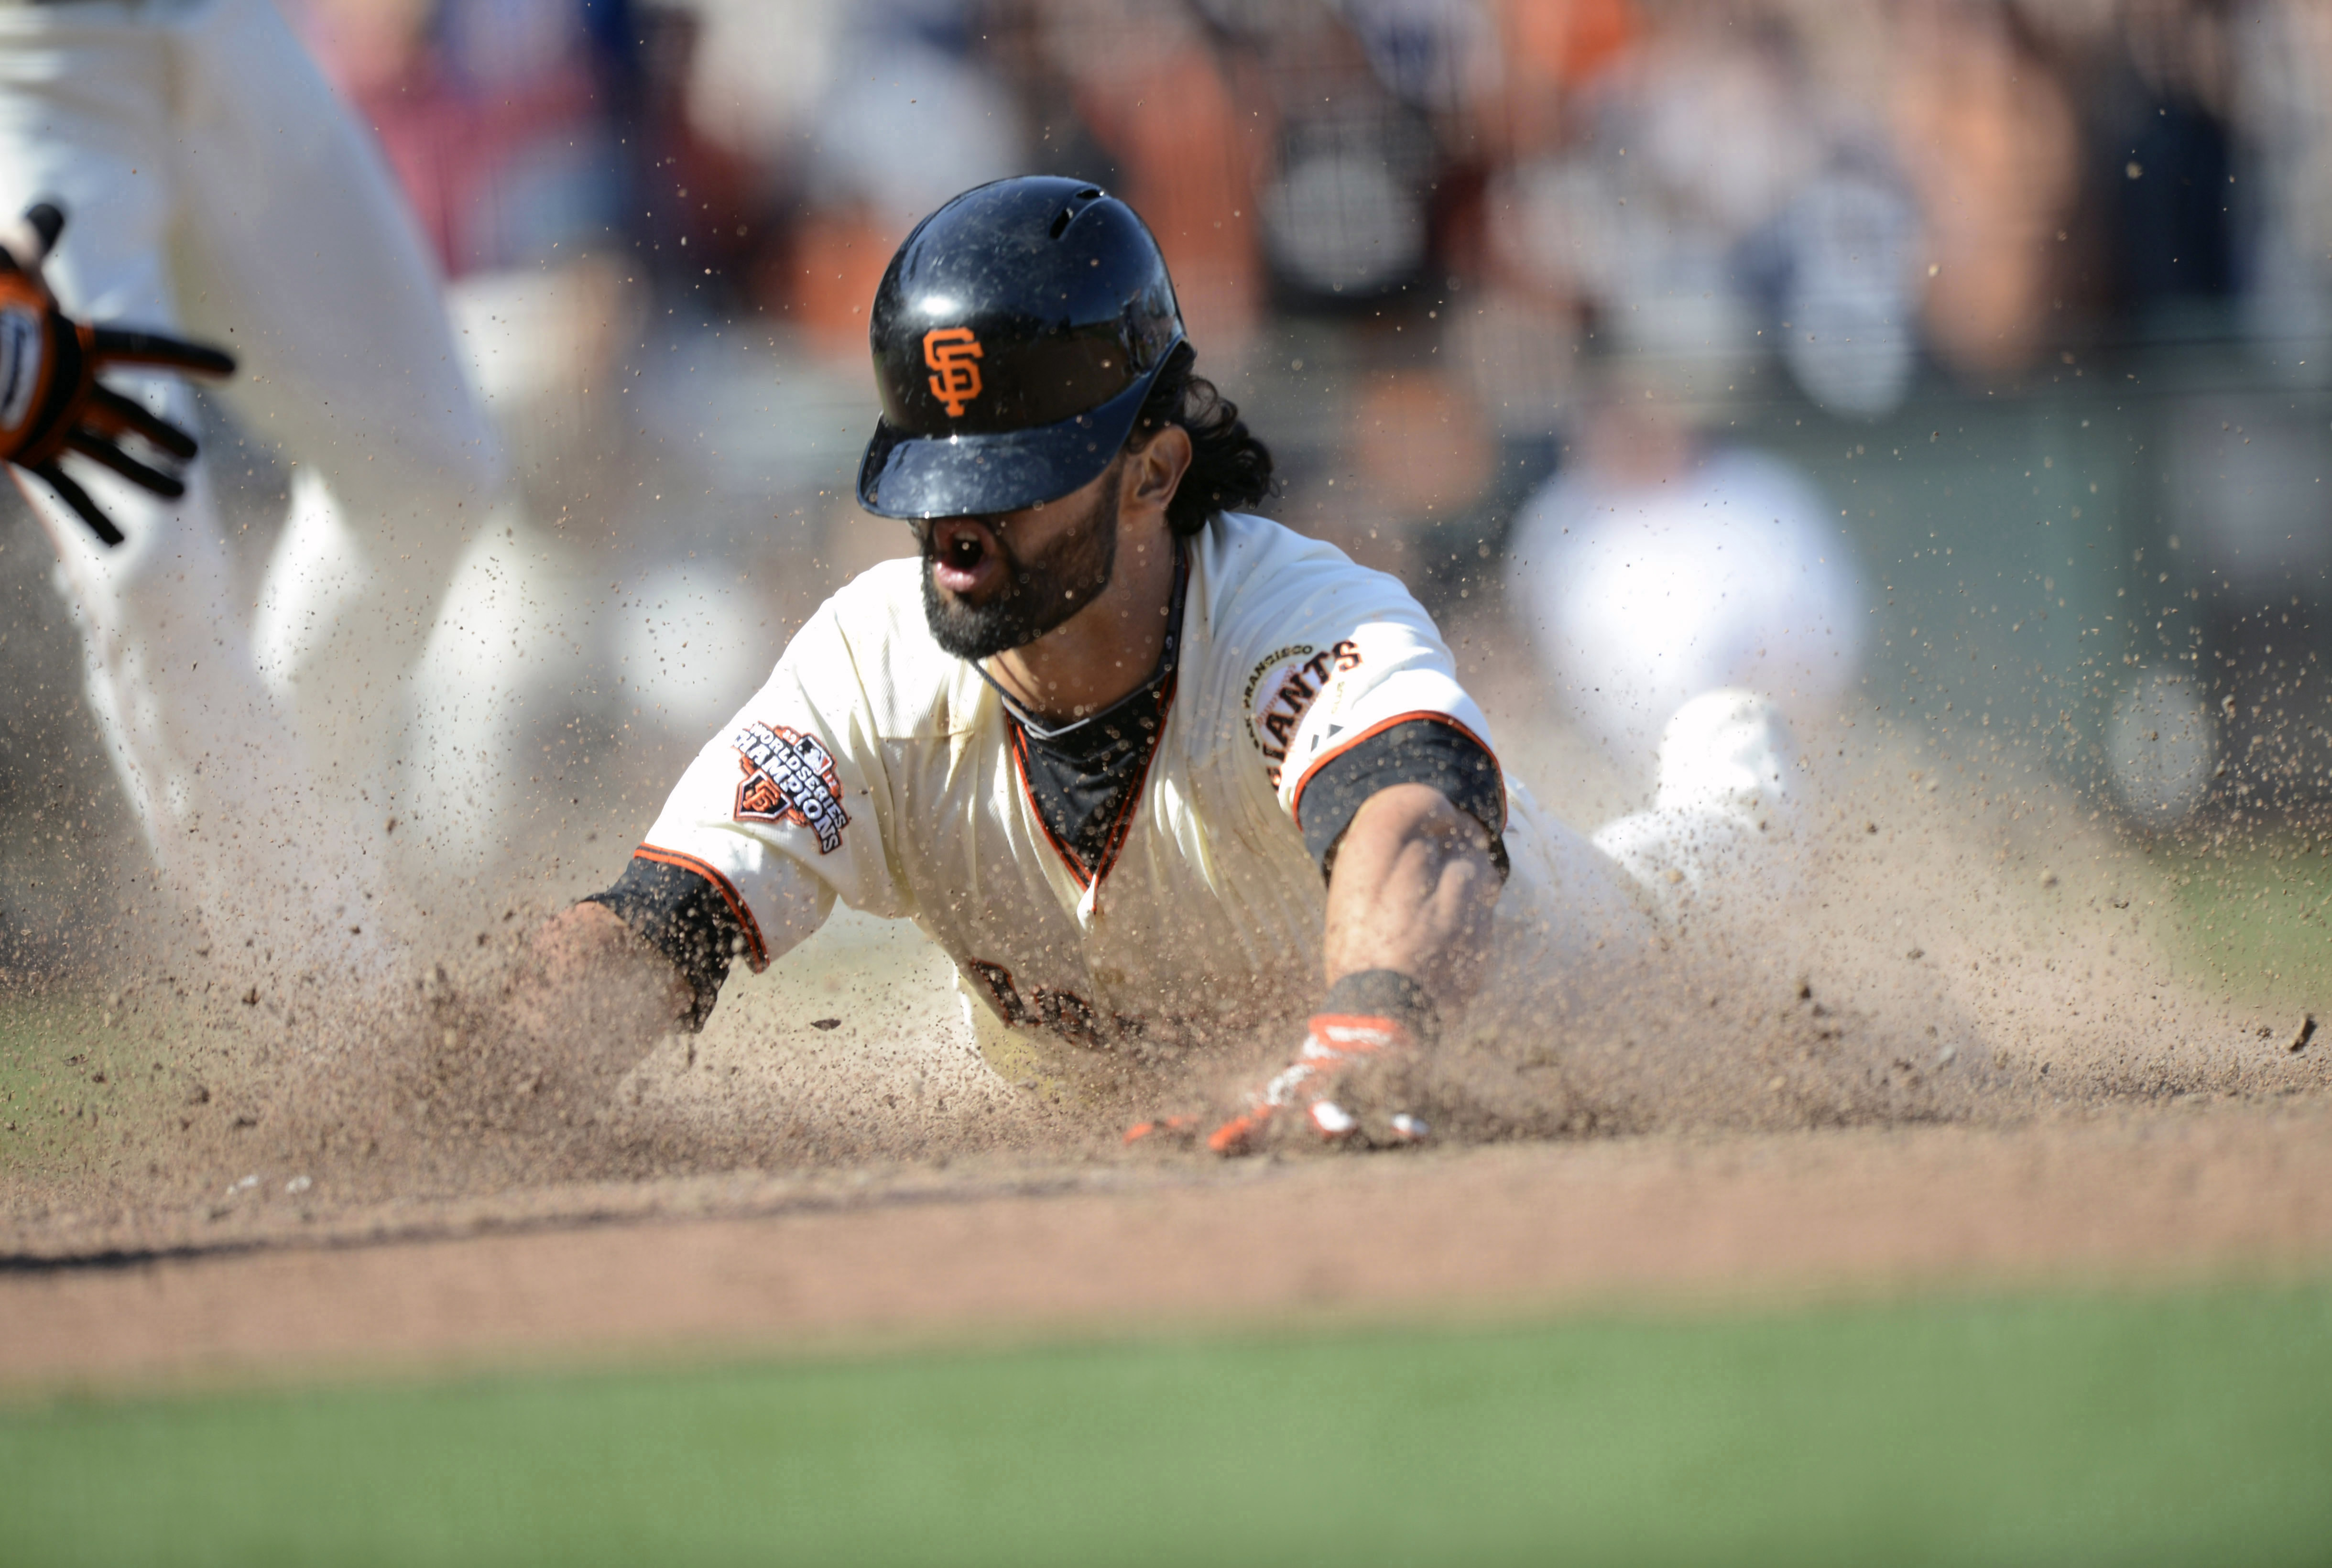 Giants Outfielder Mlb Photo High Quality Wallpaper